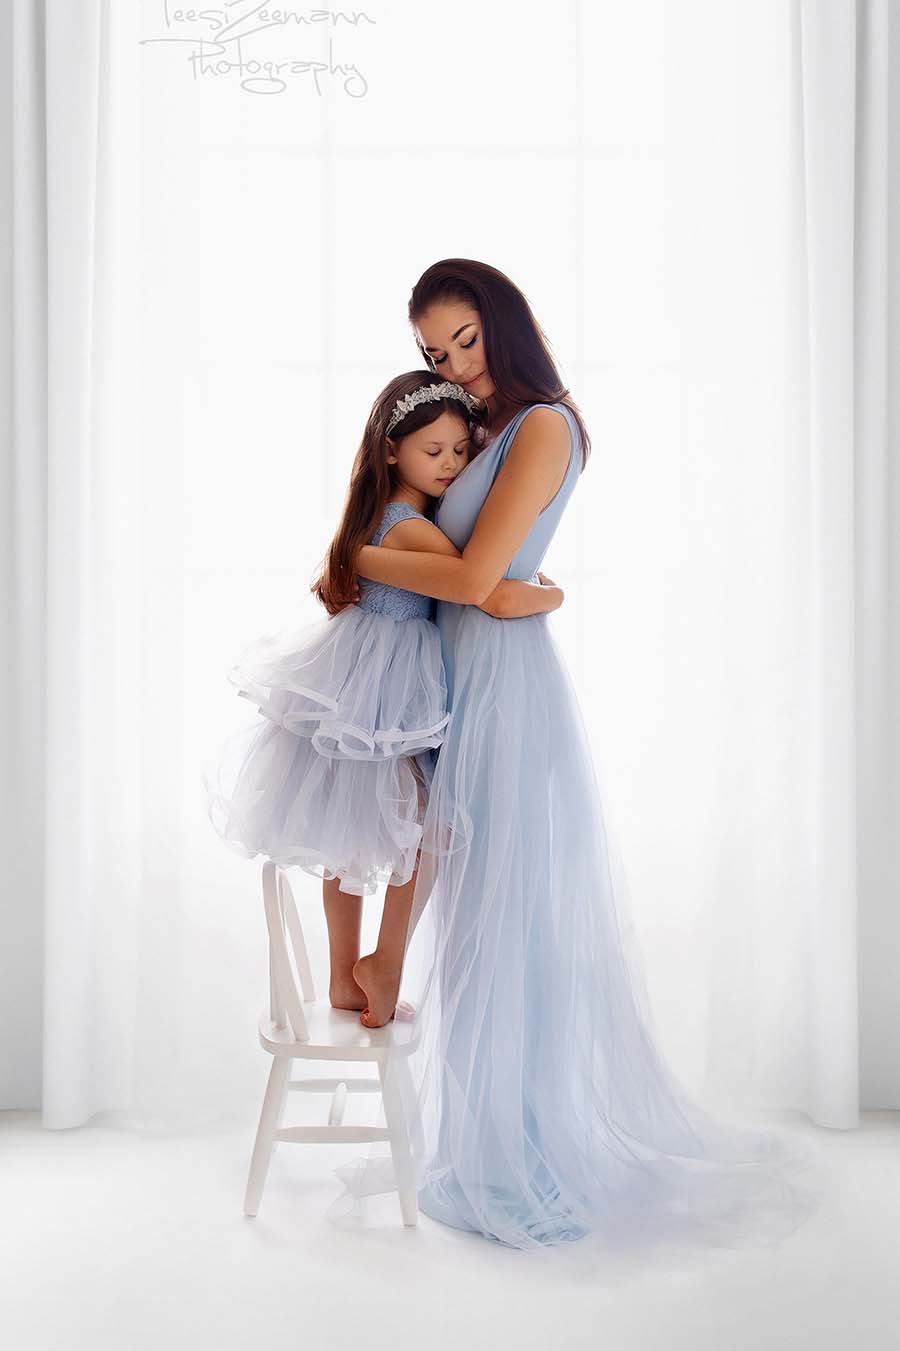 mom and daughter are holding each other during their photoshoot, both wearing matching outfits in light blue. their dresses have no sleeves and a skirt made of tulle.